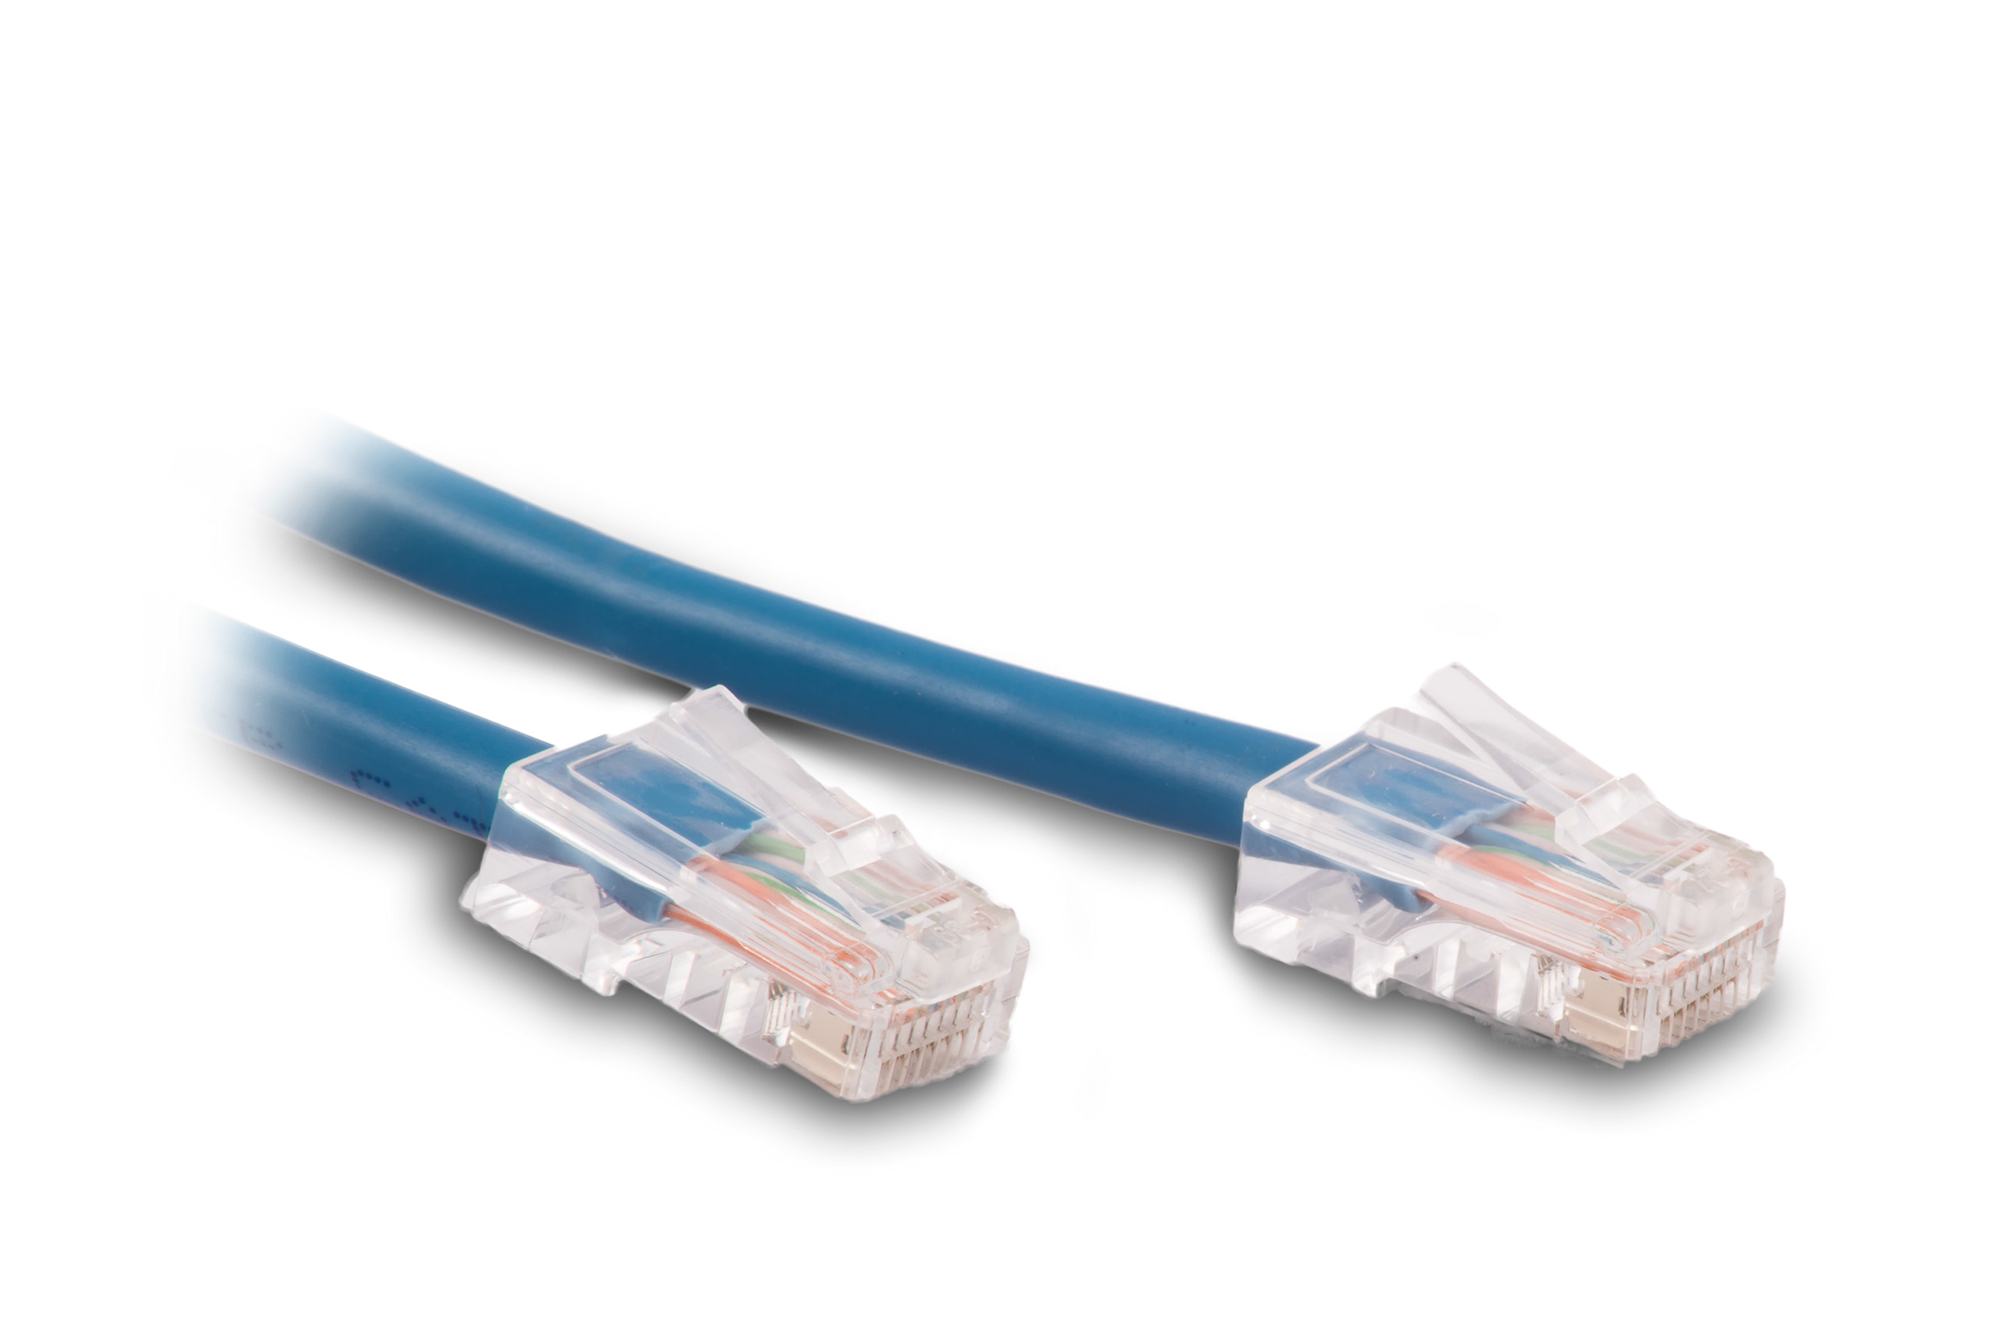 35 Feet Category 5e Network Patch Cable-Blue-Plenum Rated for in-ceiling installations!